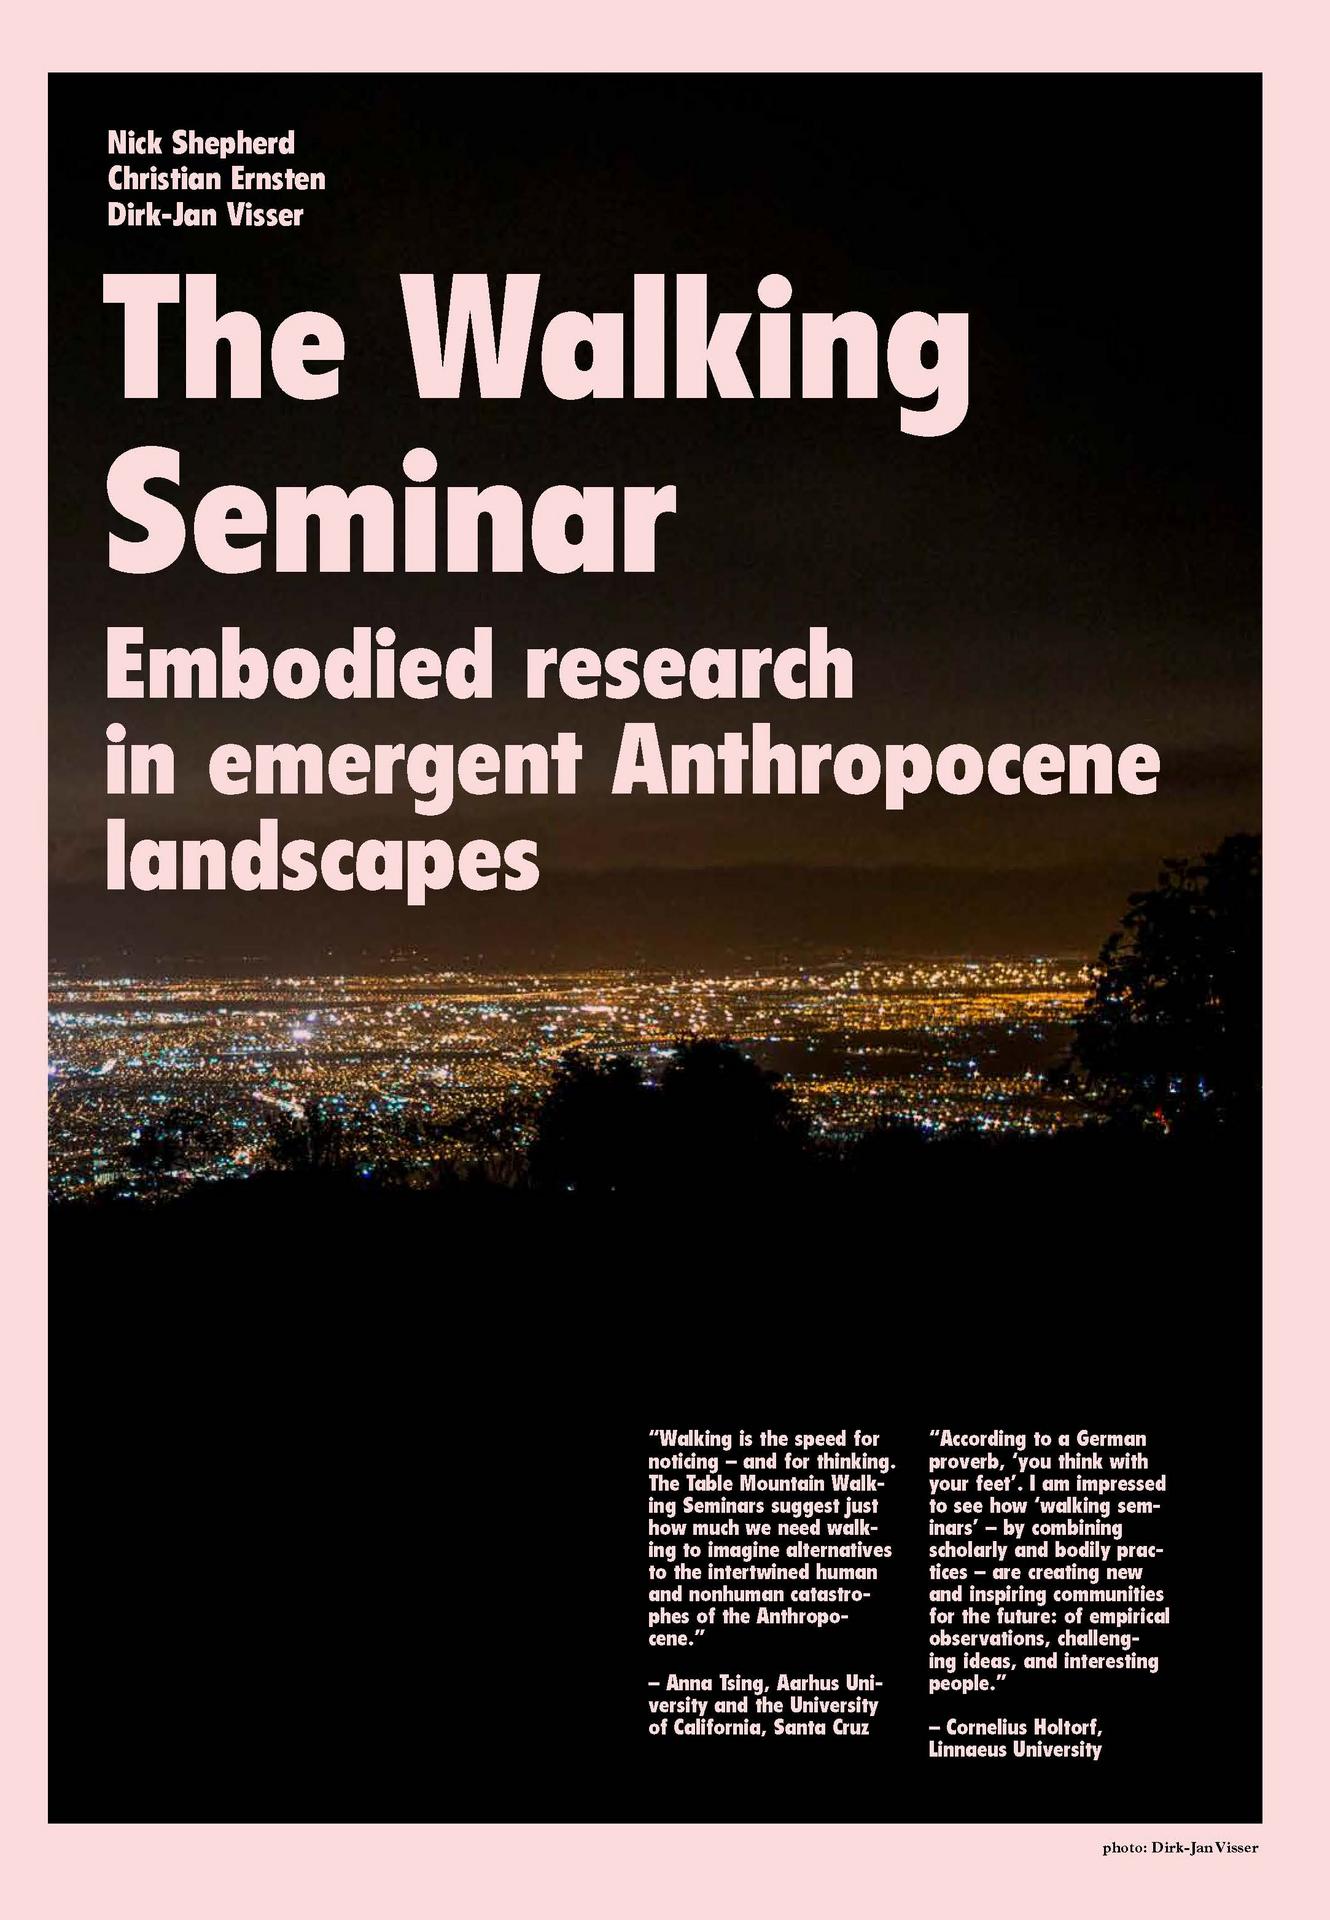 The Walking Seminar; Embodied research in emergent Anthropocene landscapes